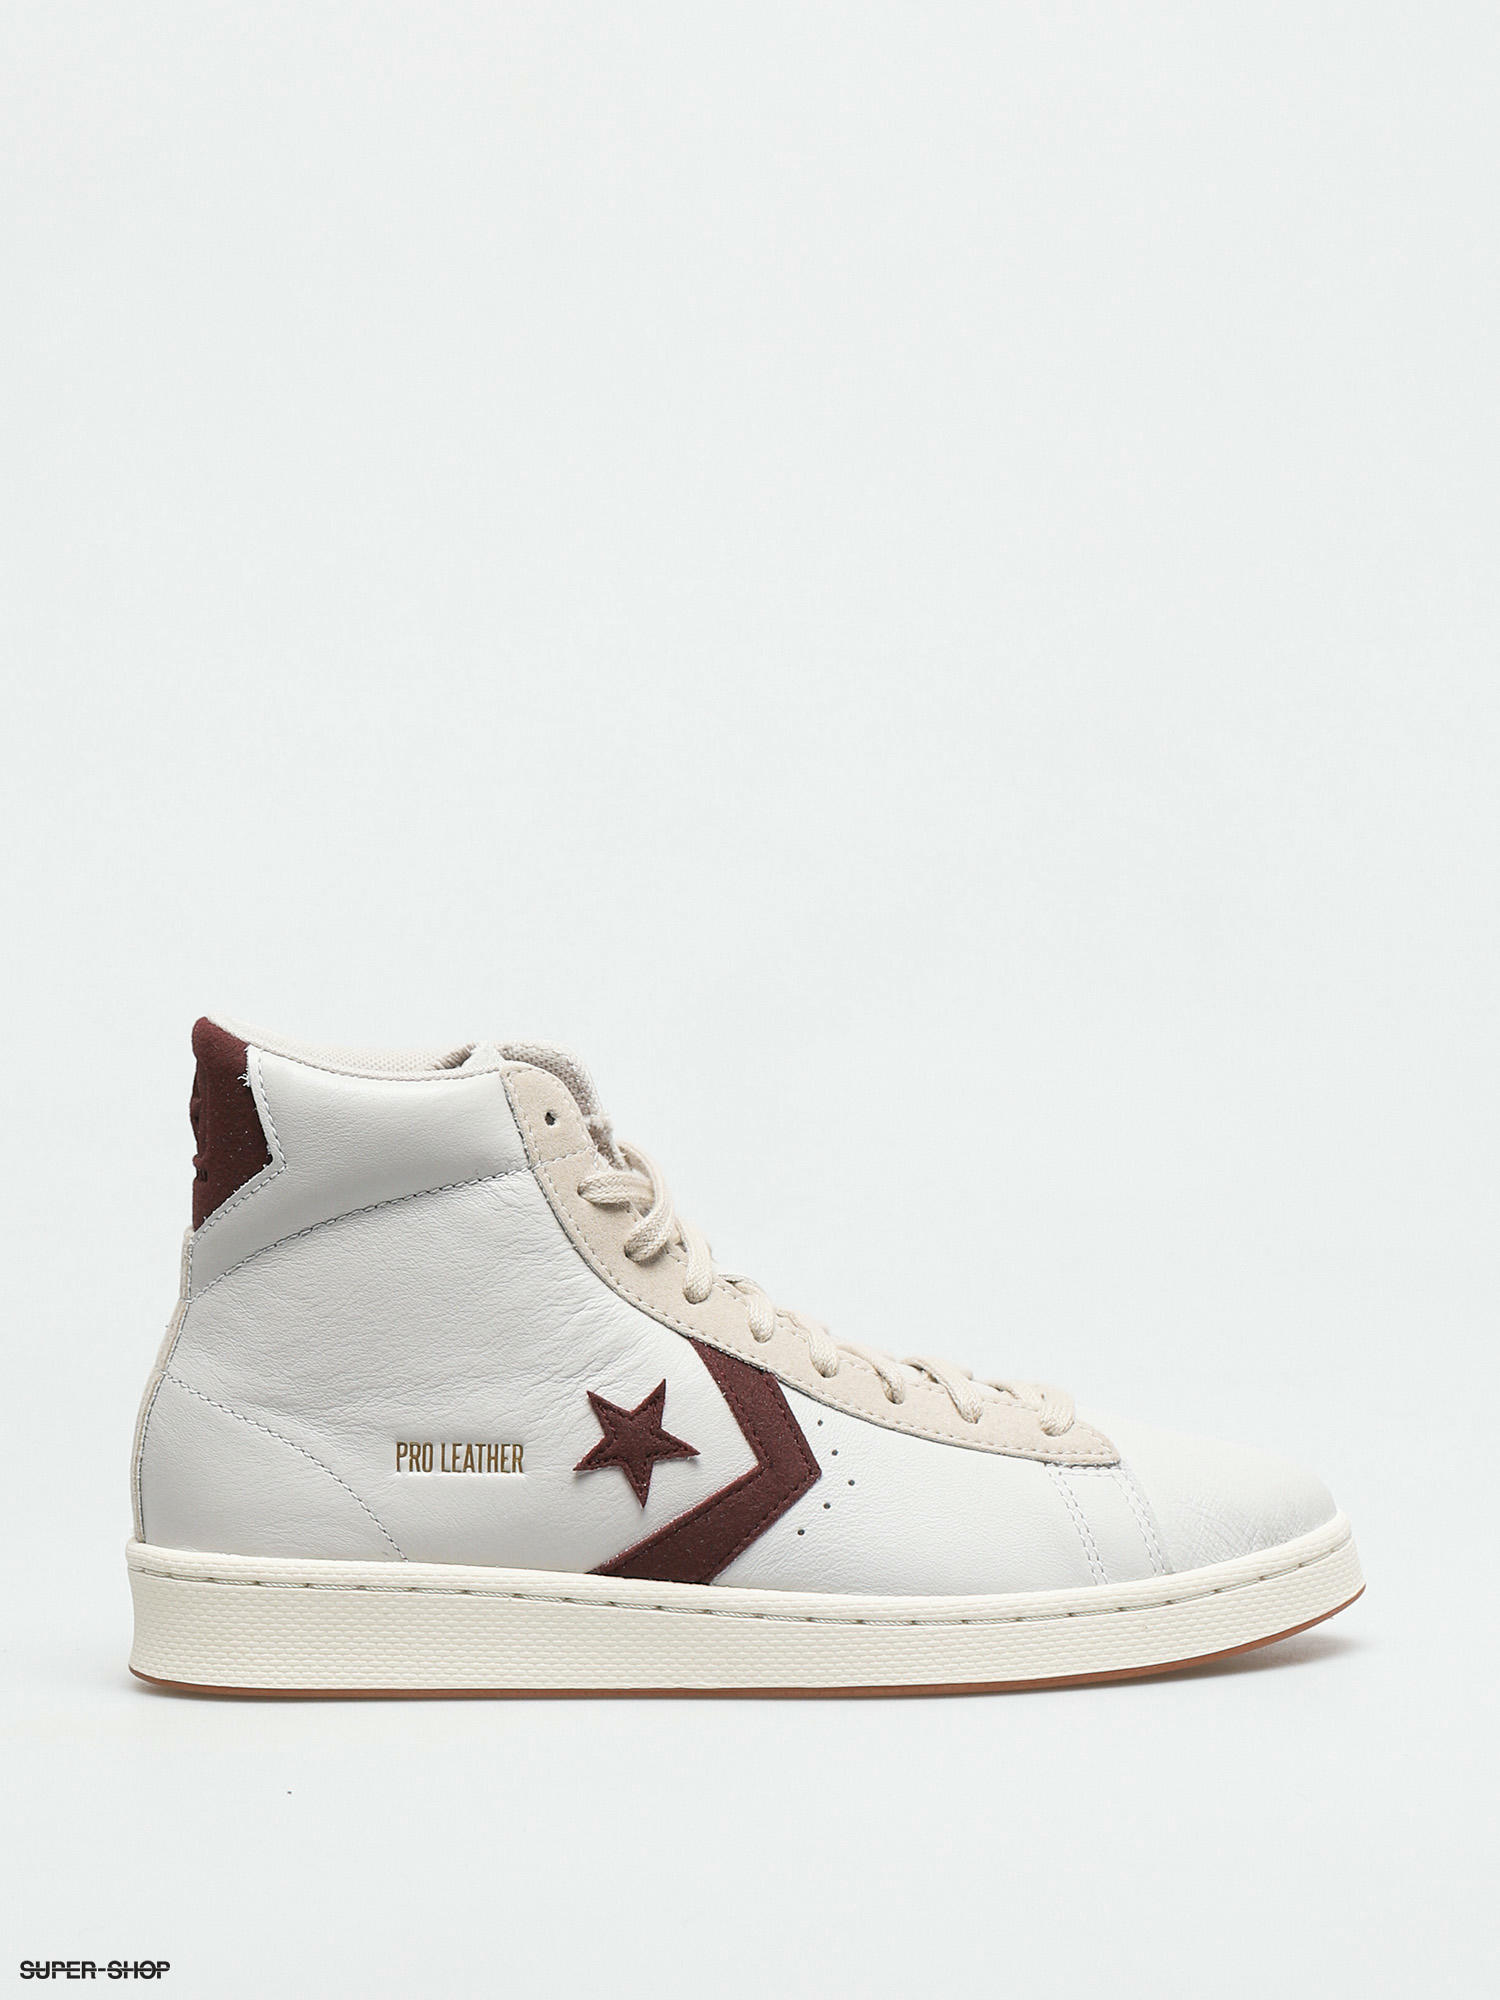 Converse Pro Leather Gold Standard Shoes (white/maroon)